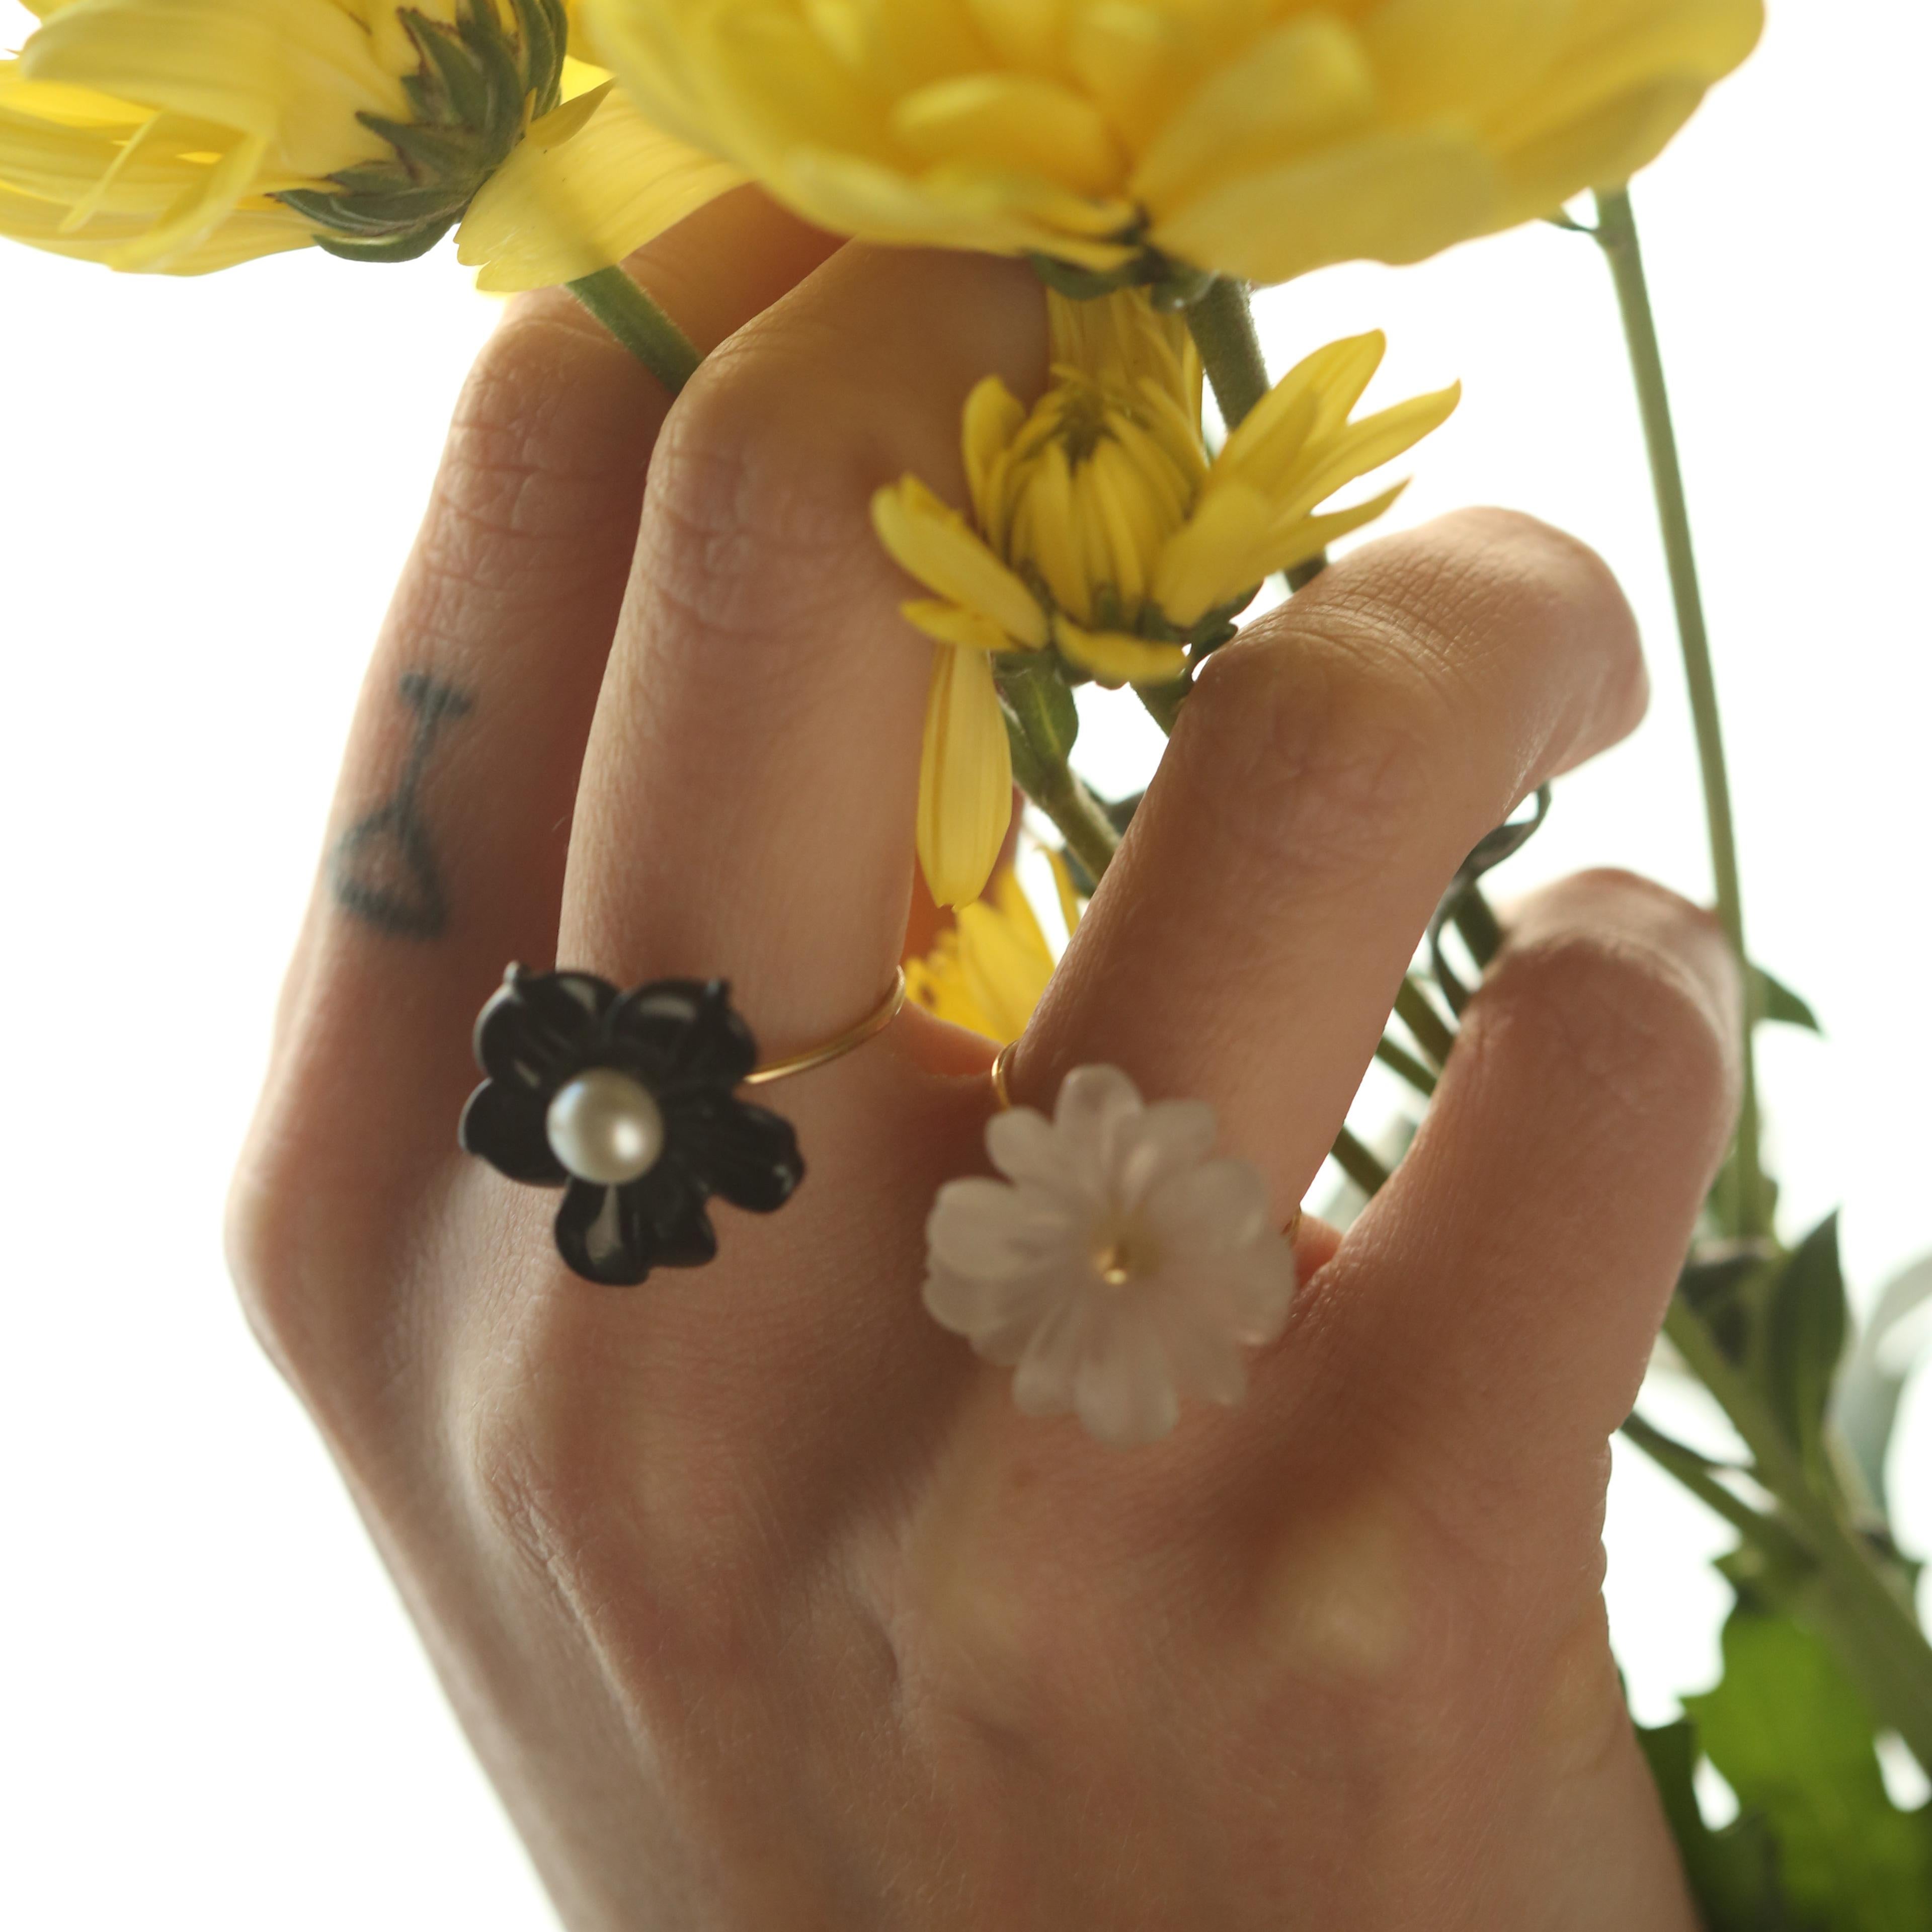 Astonishing and delicate 6.5 ct rock crystal daisy flower ring. Carved petals that evoke the italian handmade traditional jewelry work, wrapping itself in a soft look enriched with 18 karat yellow gold manifesting glamour and exquisite taste. 
 
